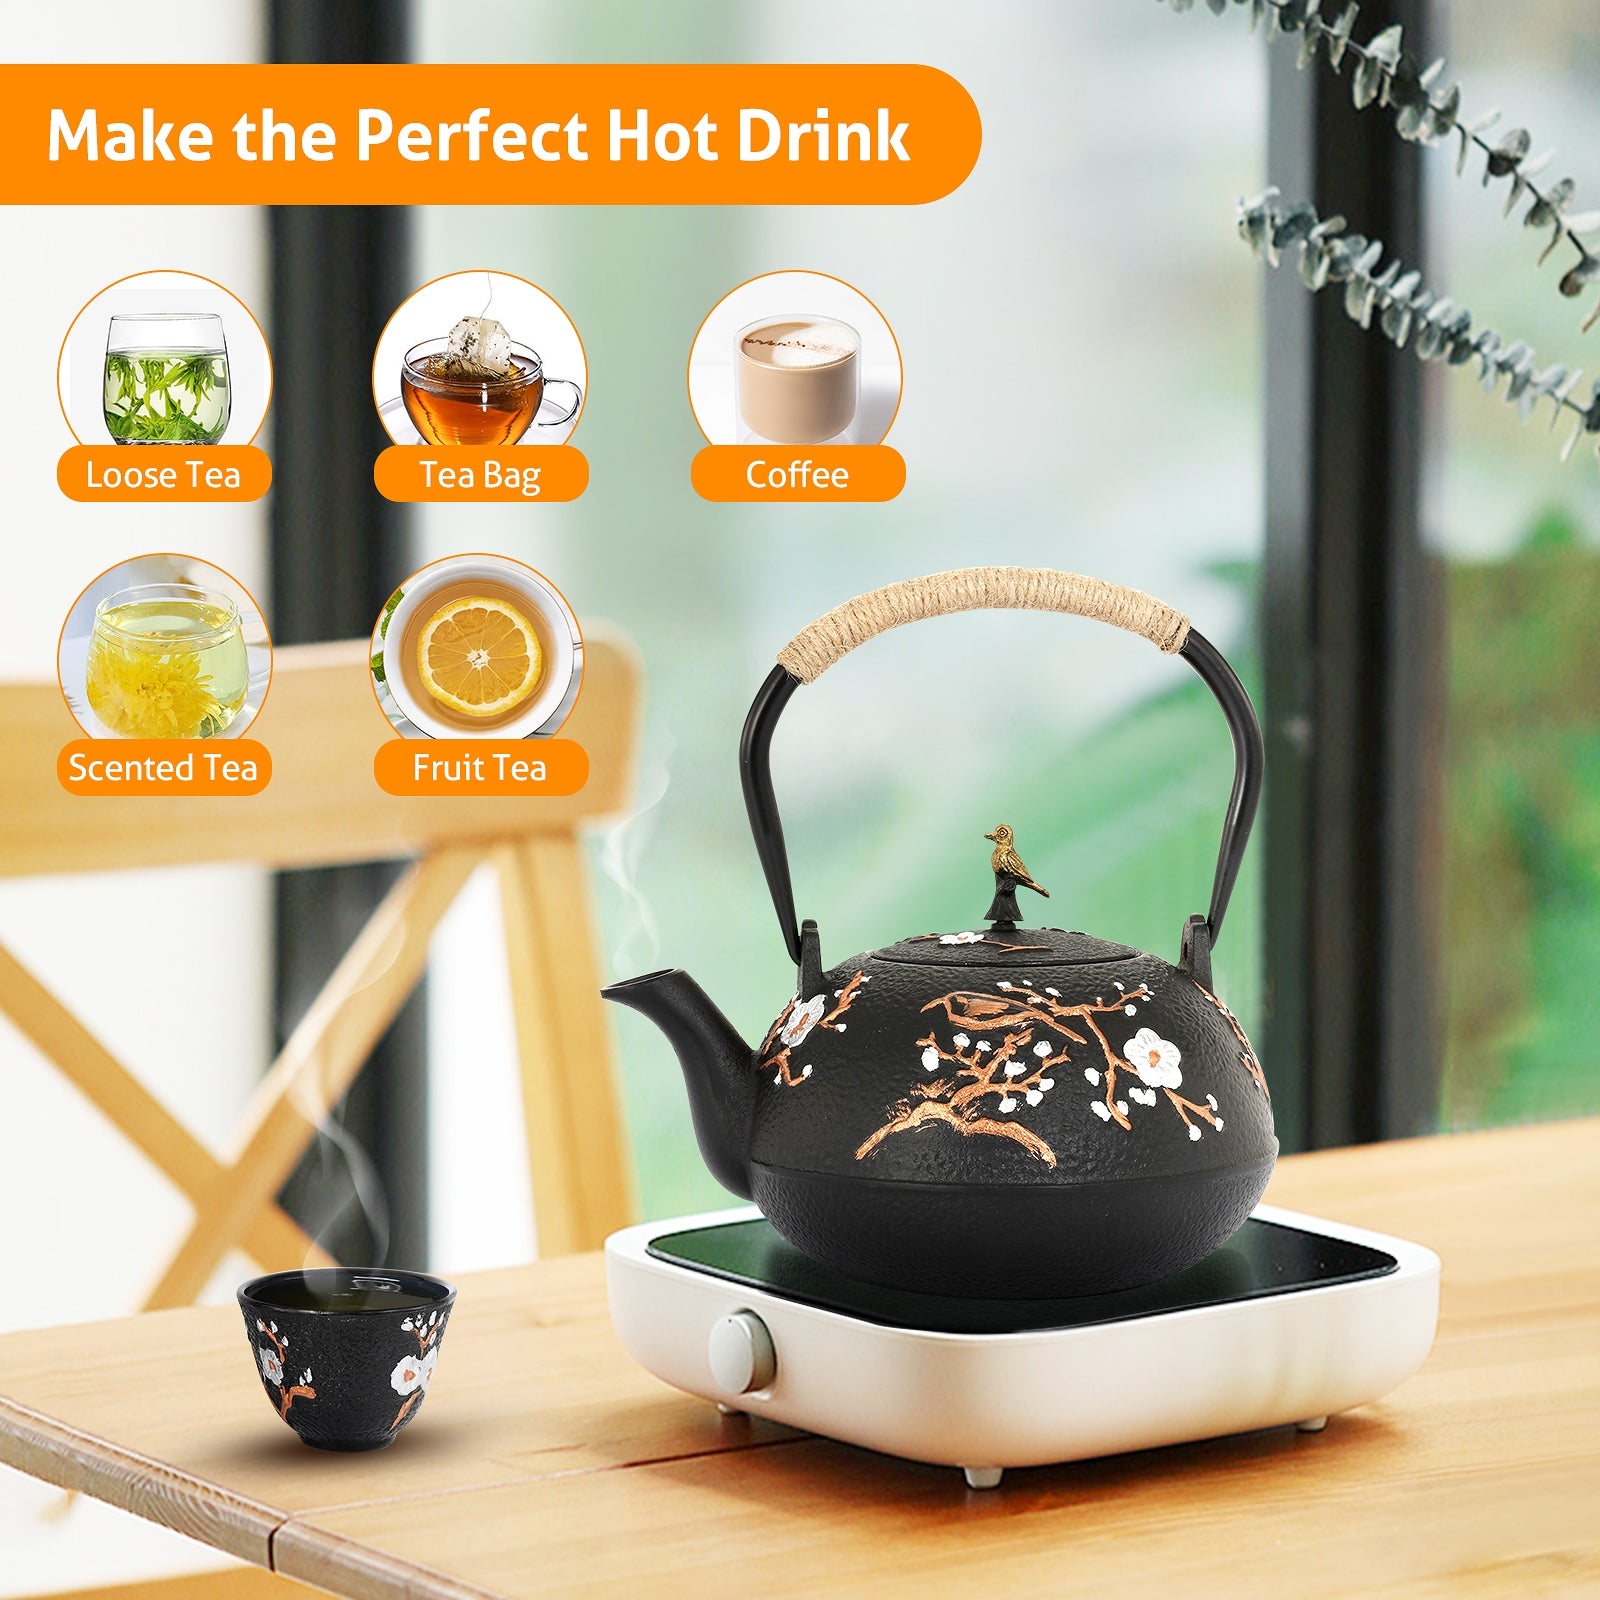 Cast Iron Tea Kettle for Stovetop - Japanese Tea Set with Warmer